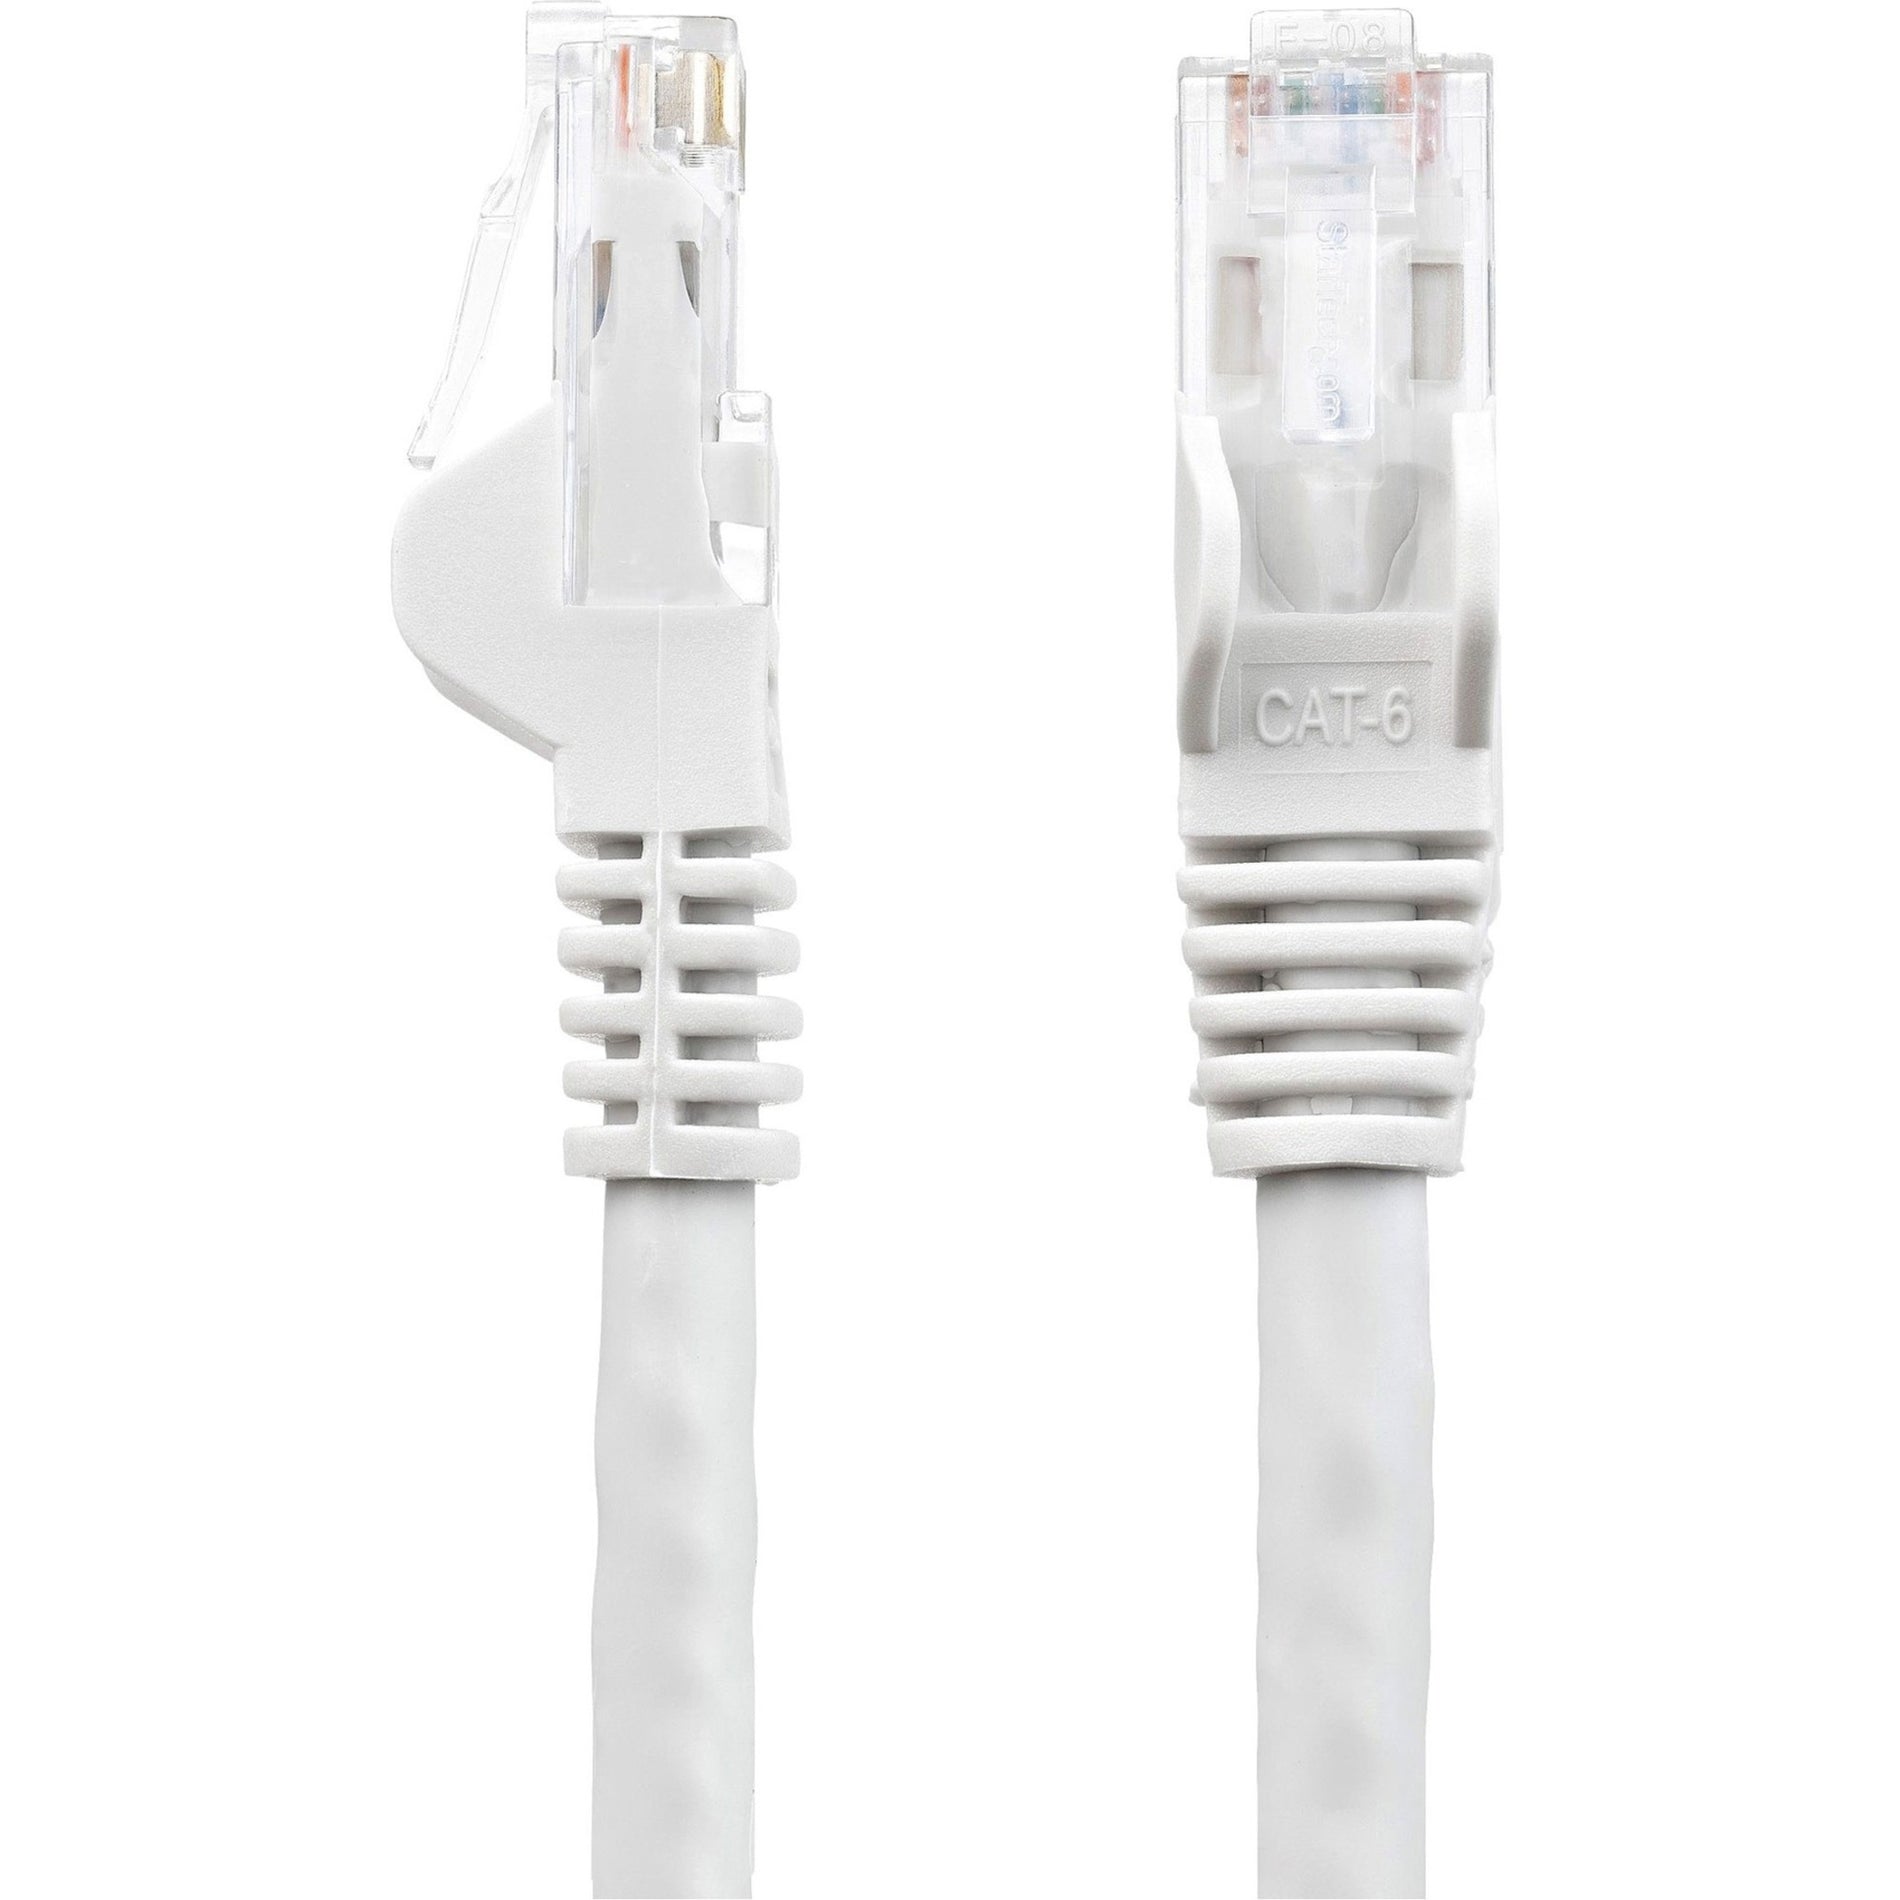 StarTech.com N6PATCH15WH 15 ft White Snagless Cat6 UTP Patch Cable, Molded, 10 Gbit/s, Gold Plated Connectors